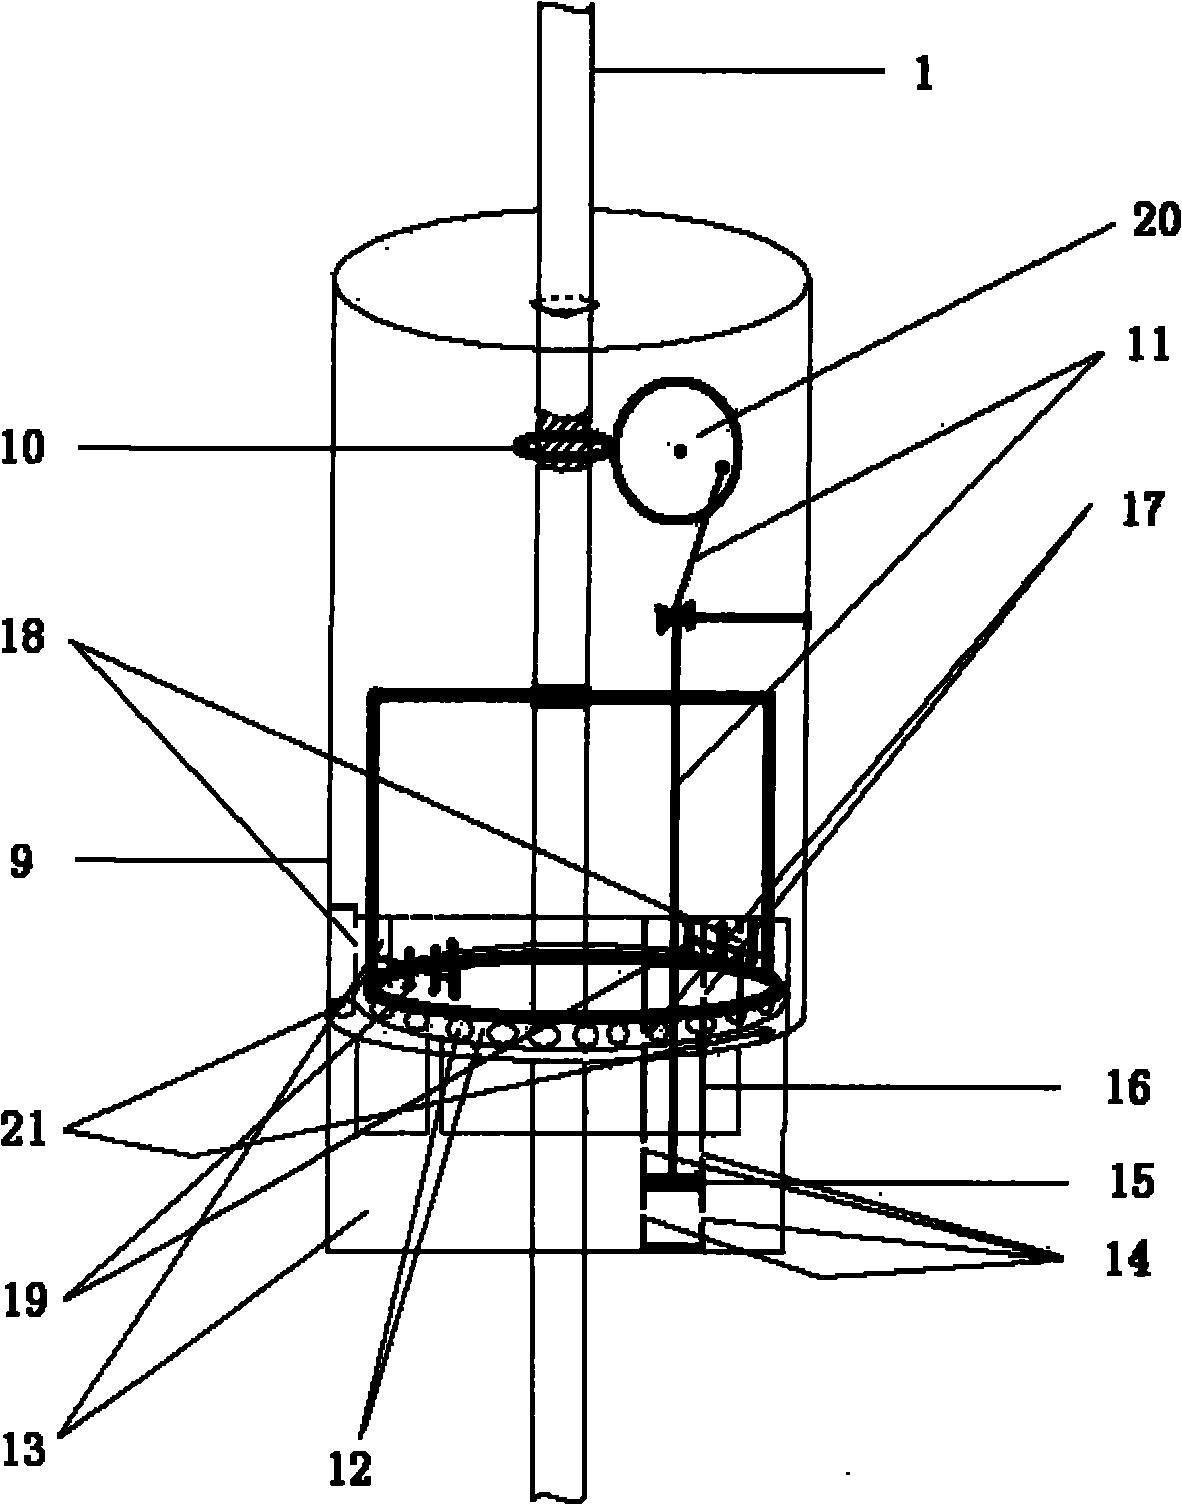 Blade-collapsible, oil resistance-regulated and controlled vertical-spindle wind-driven generating device